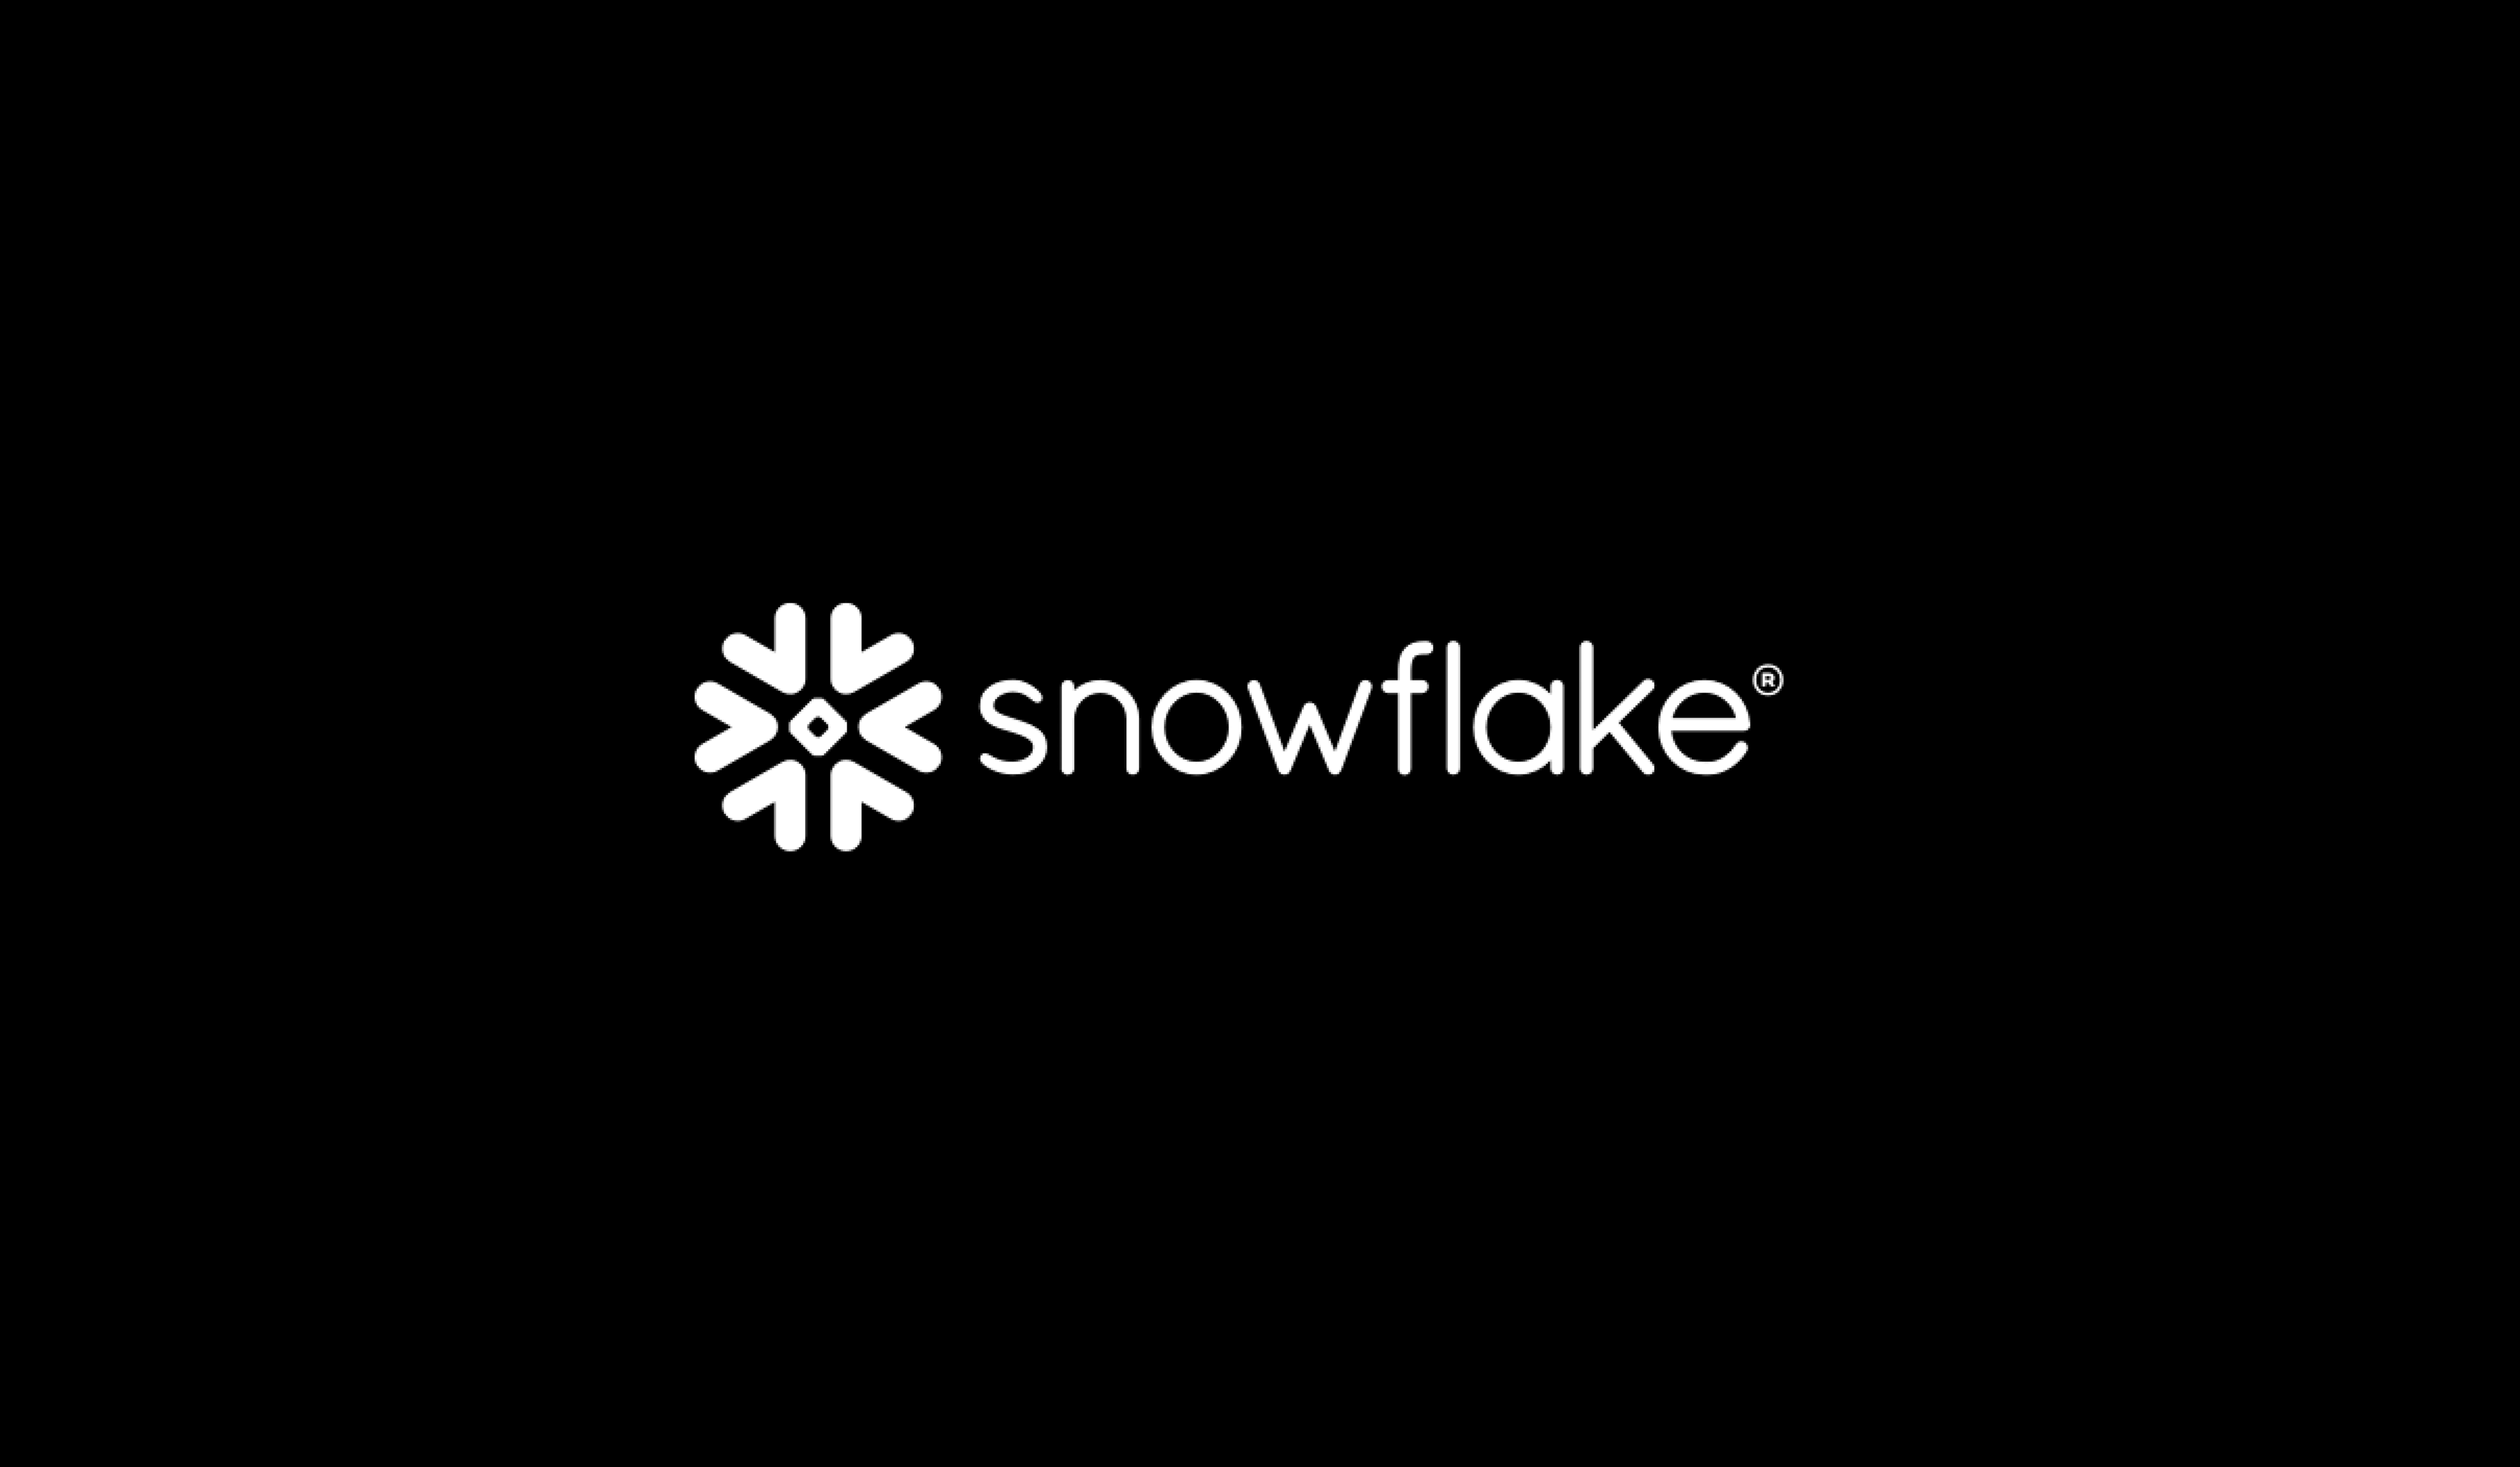 Snowflake Shares Are Falling: What&#39;s Going On?